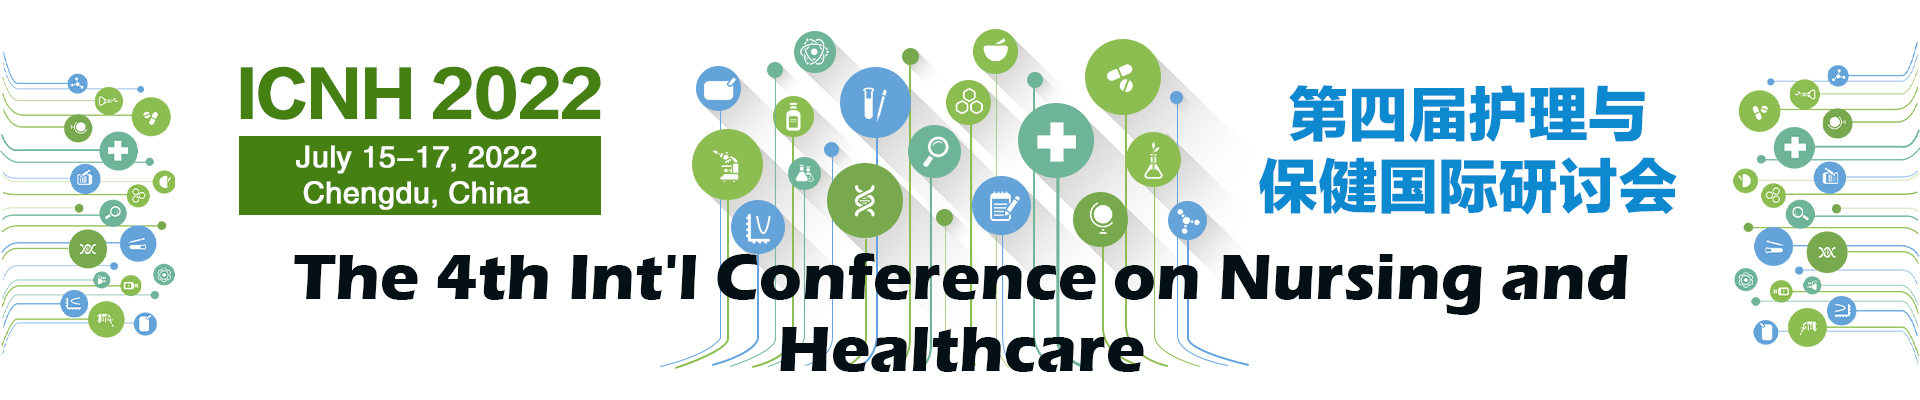 The 4th International Conference on Nursing and Healthcare (ICNH 2022)